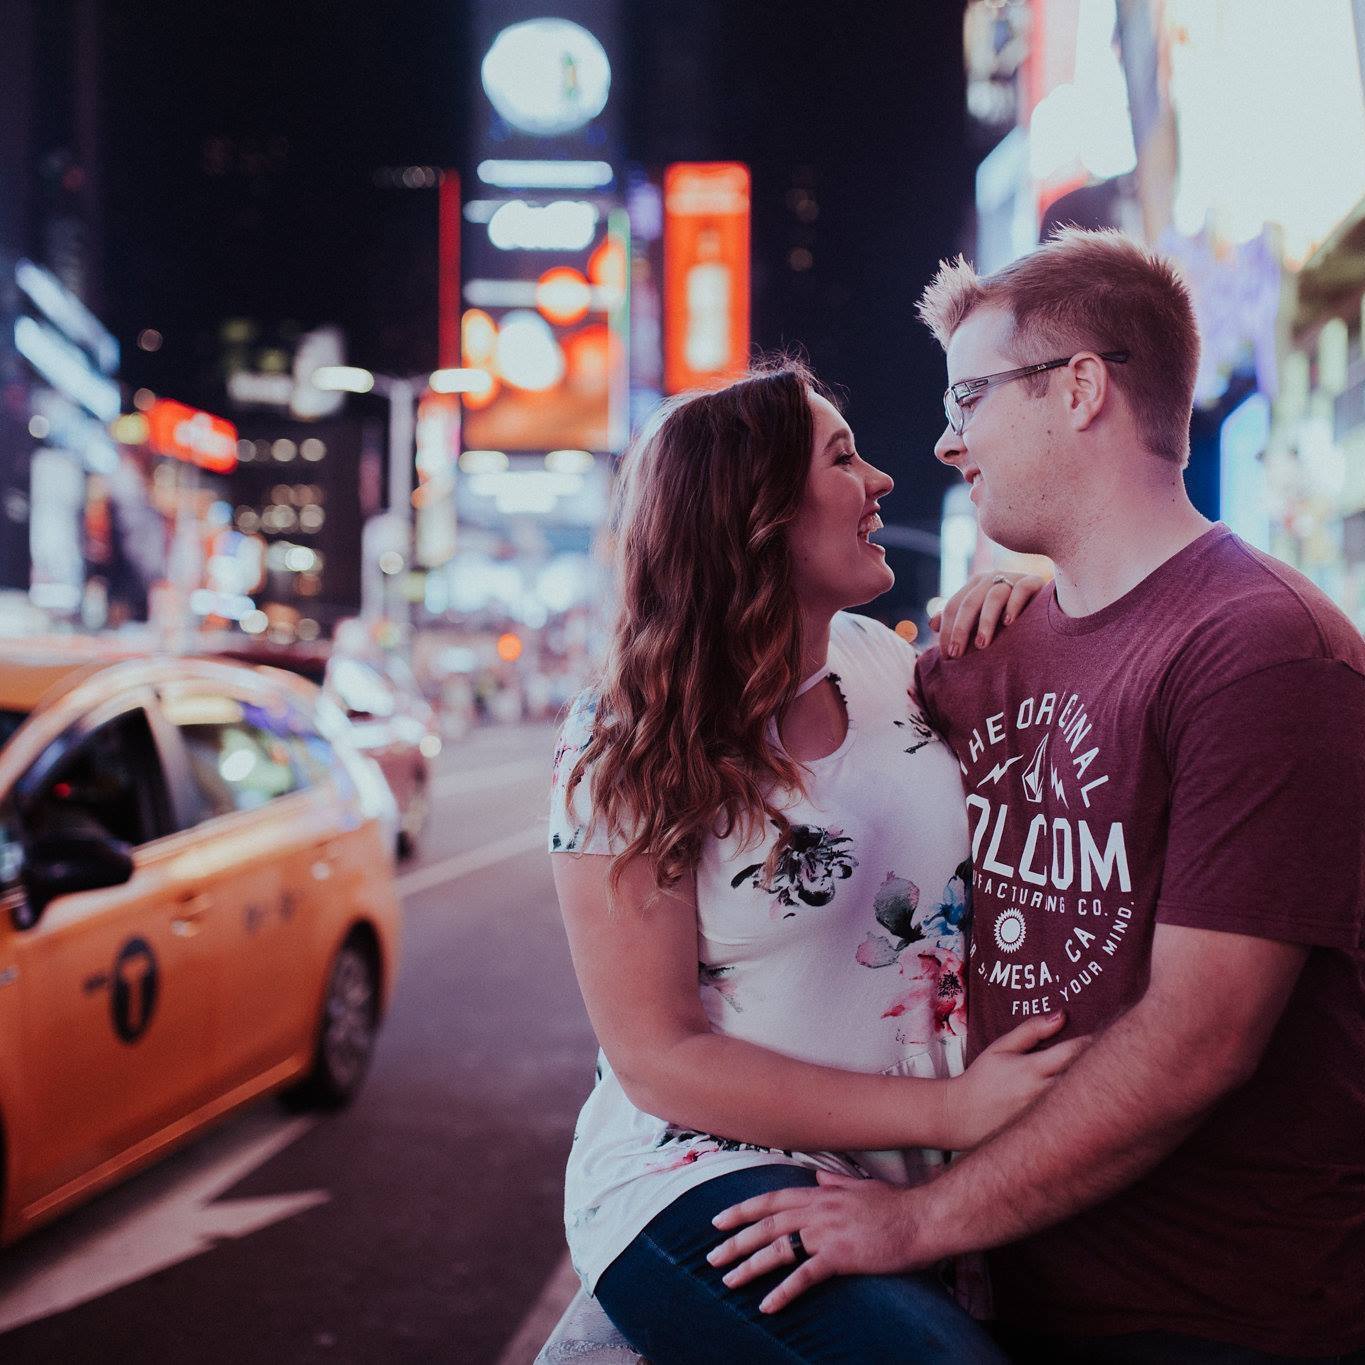 couple embracing new york times square with taxi in the background romantic look for the light photo video celine reese